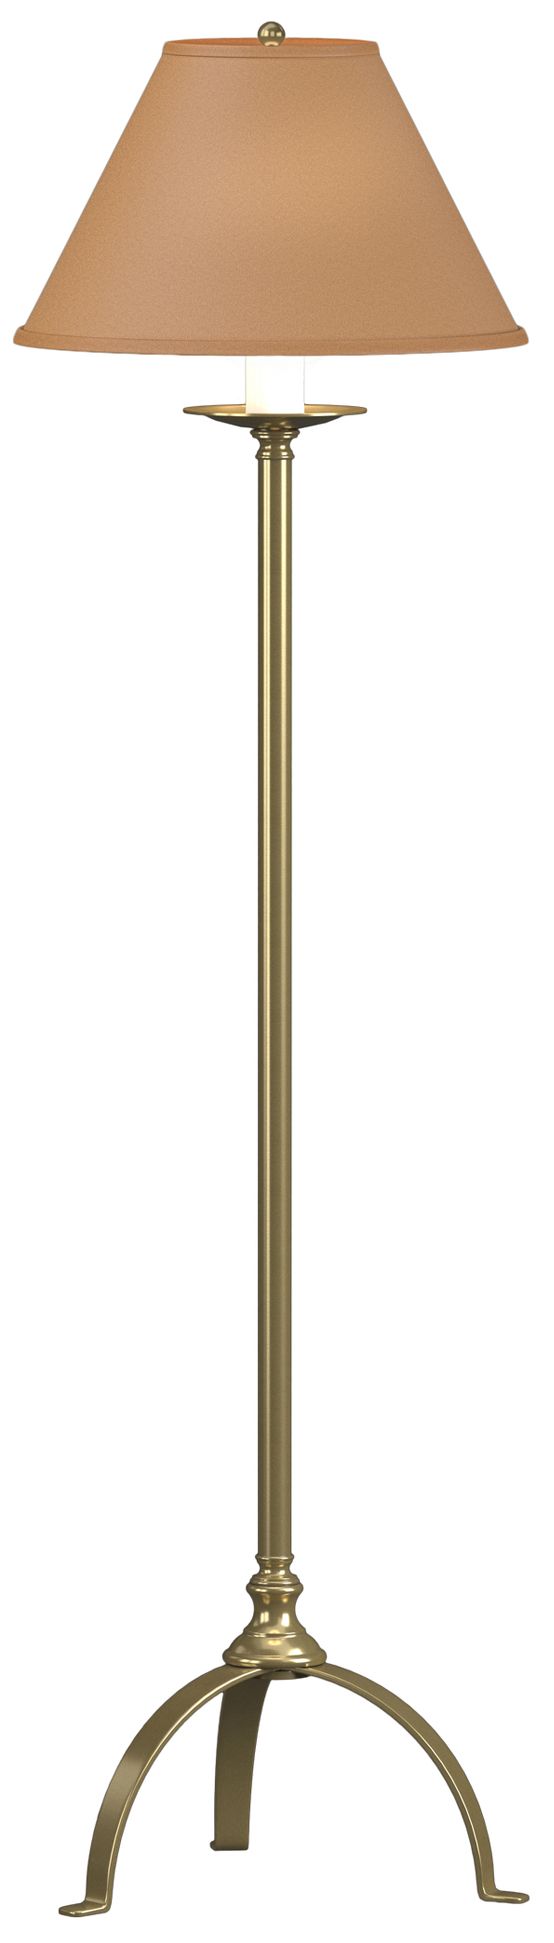 Simple Lines 58"H Modern Brass Floor Lamp With Doeskin Suede Shade